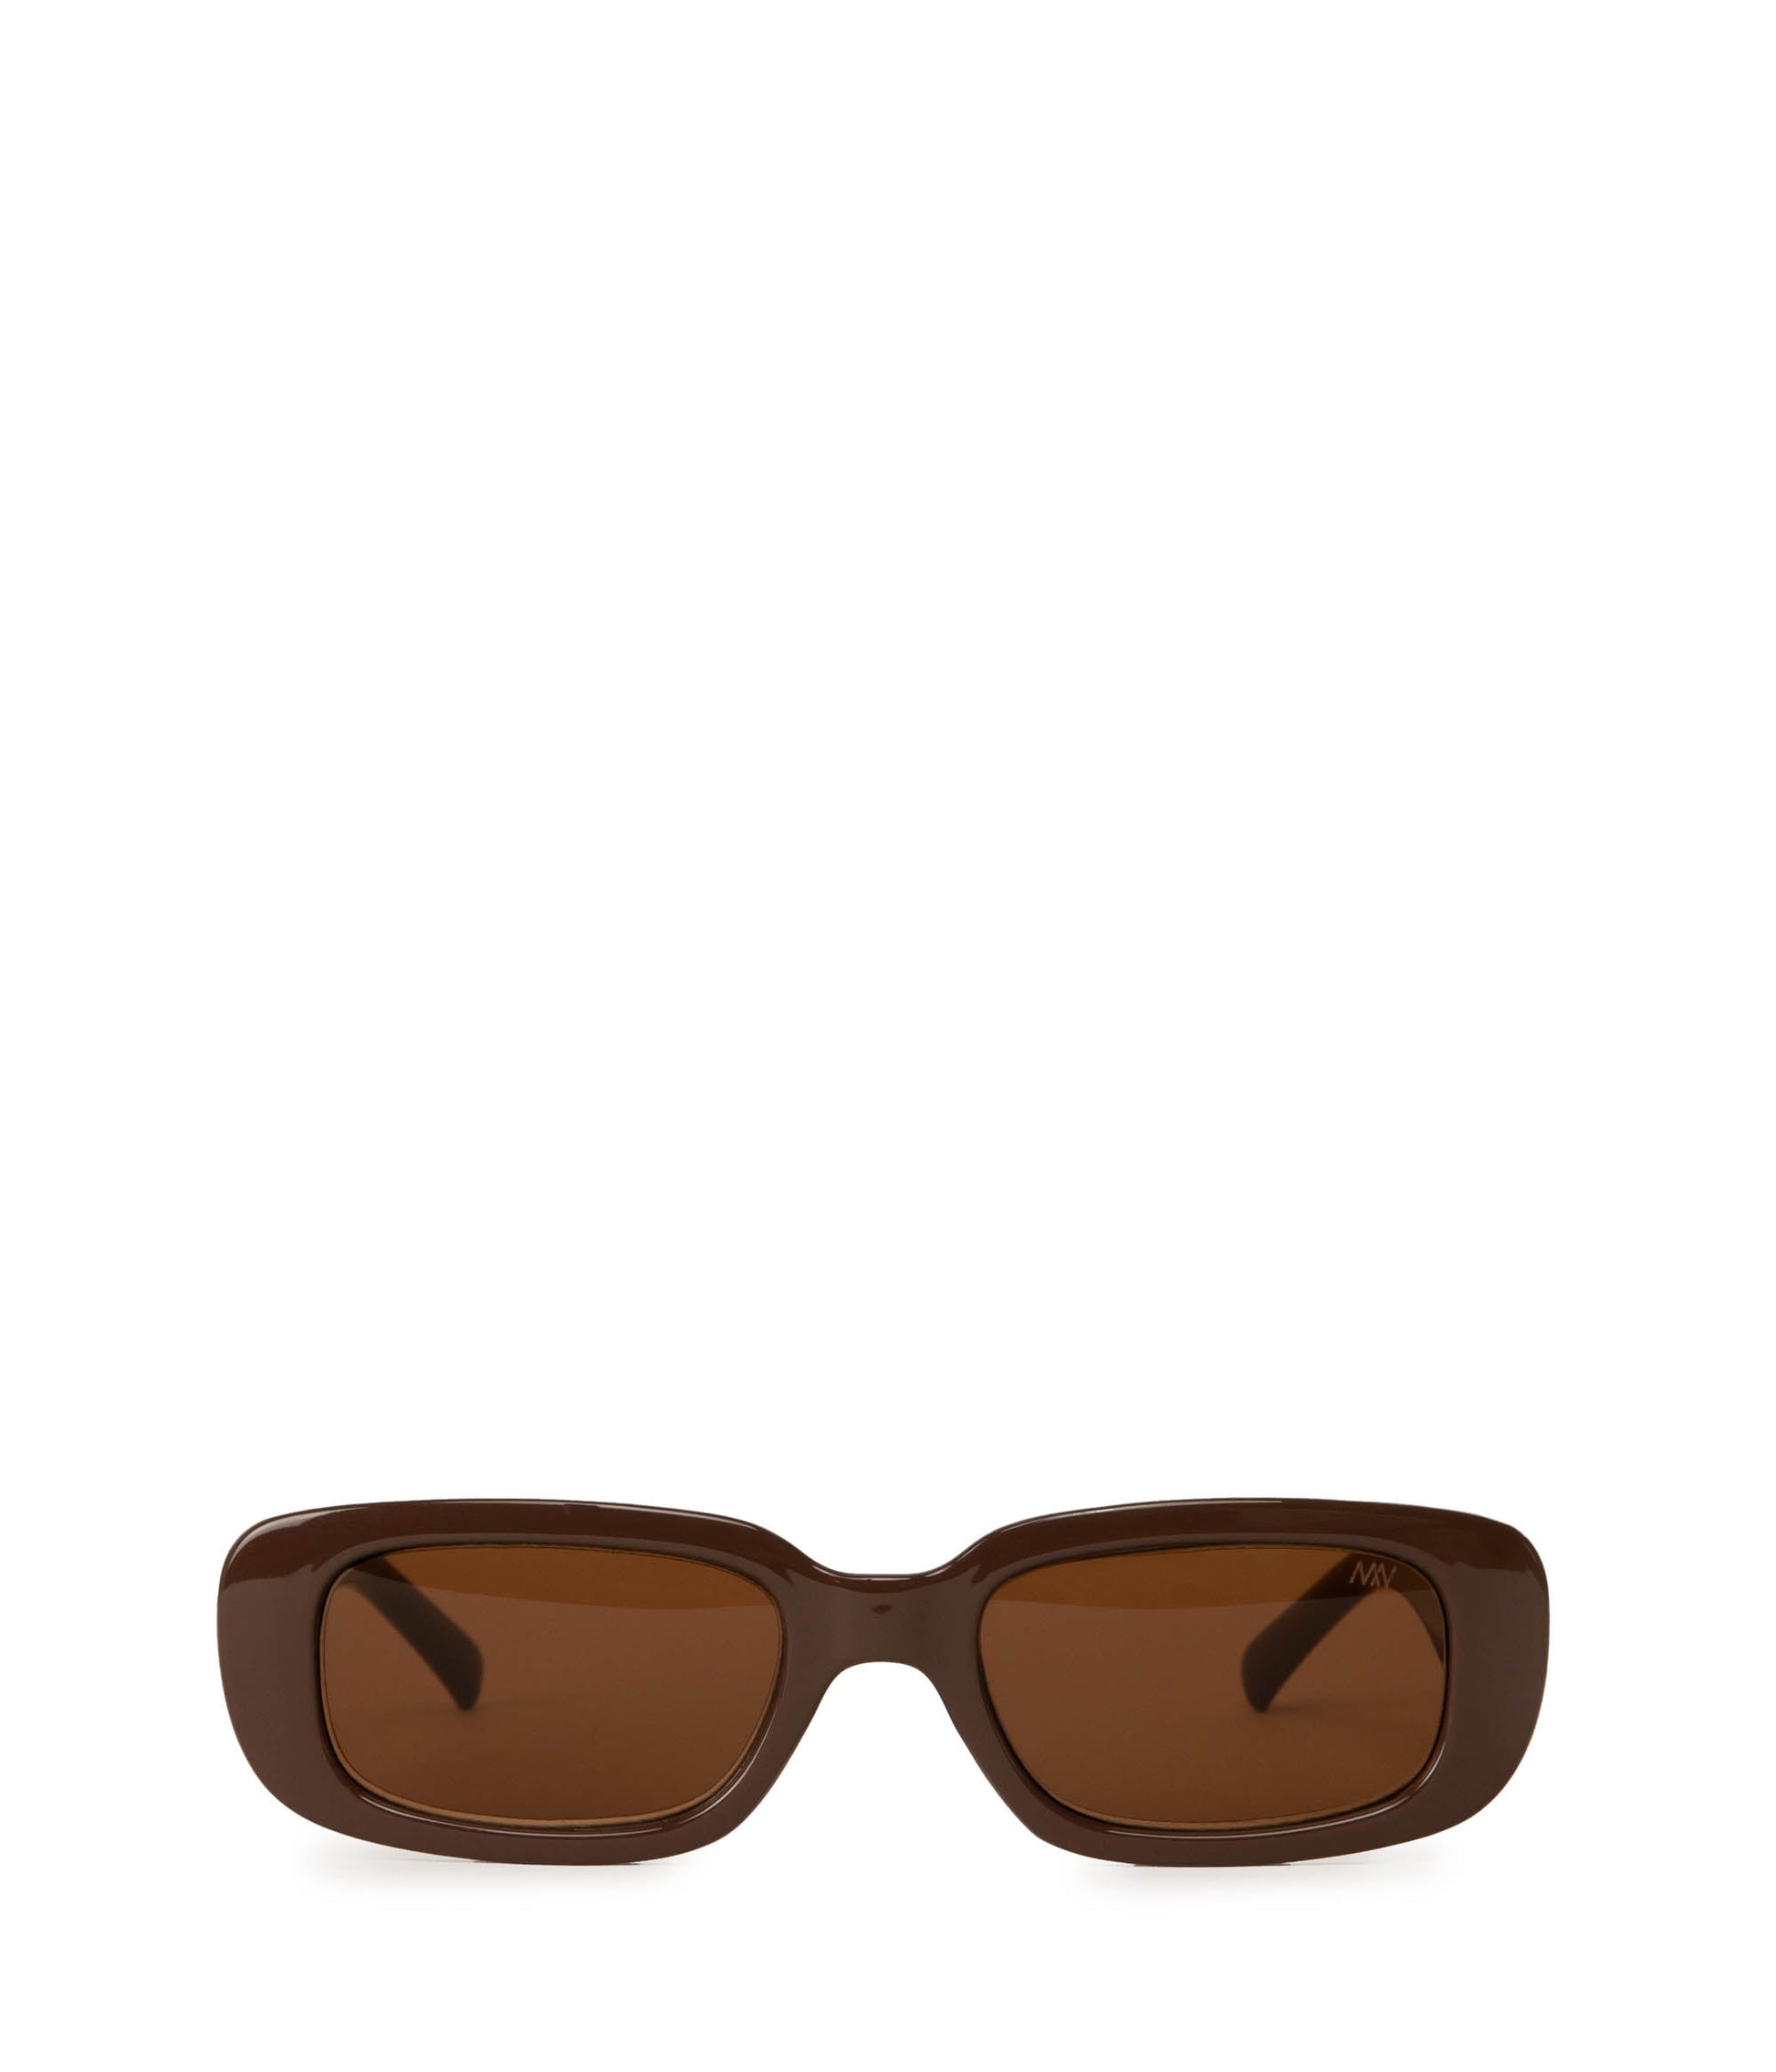 KIIN-2 Recycled Rectangle Sunglasses | Color: Brown - variant::brown